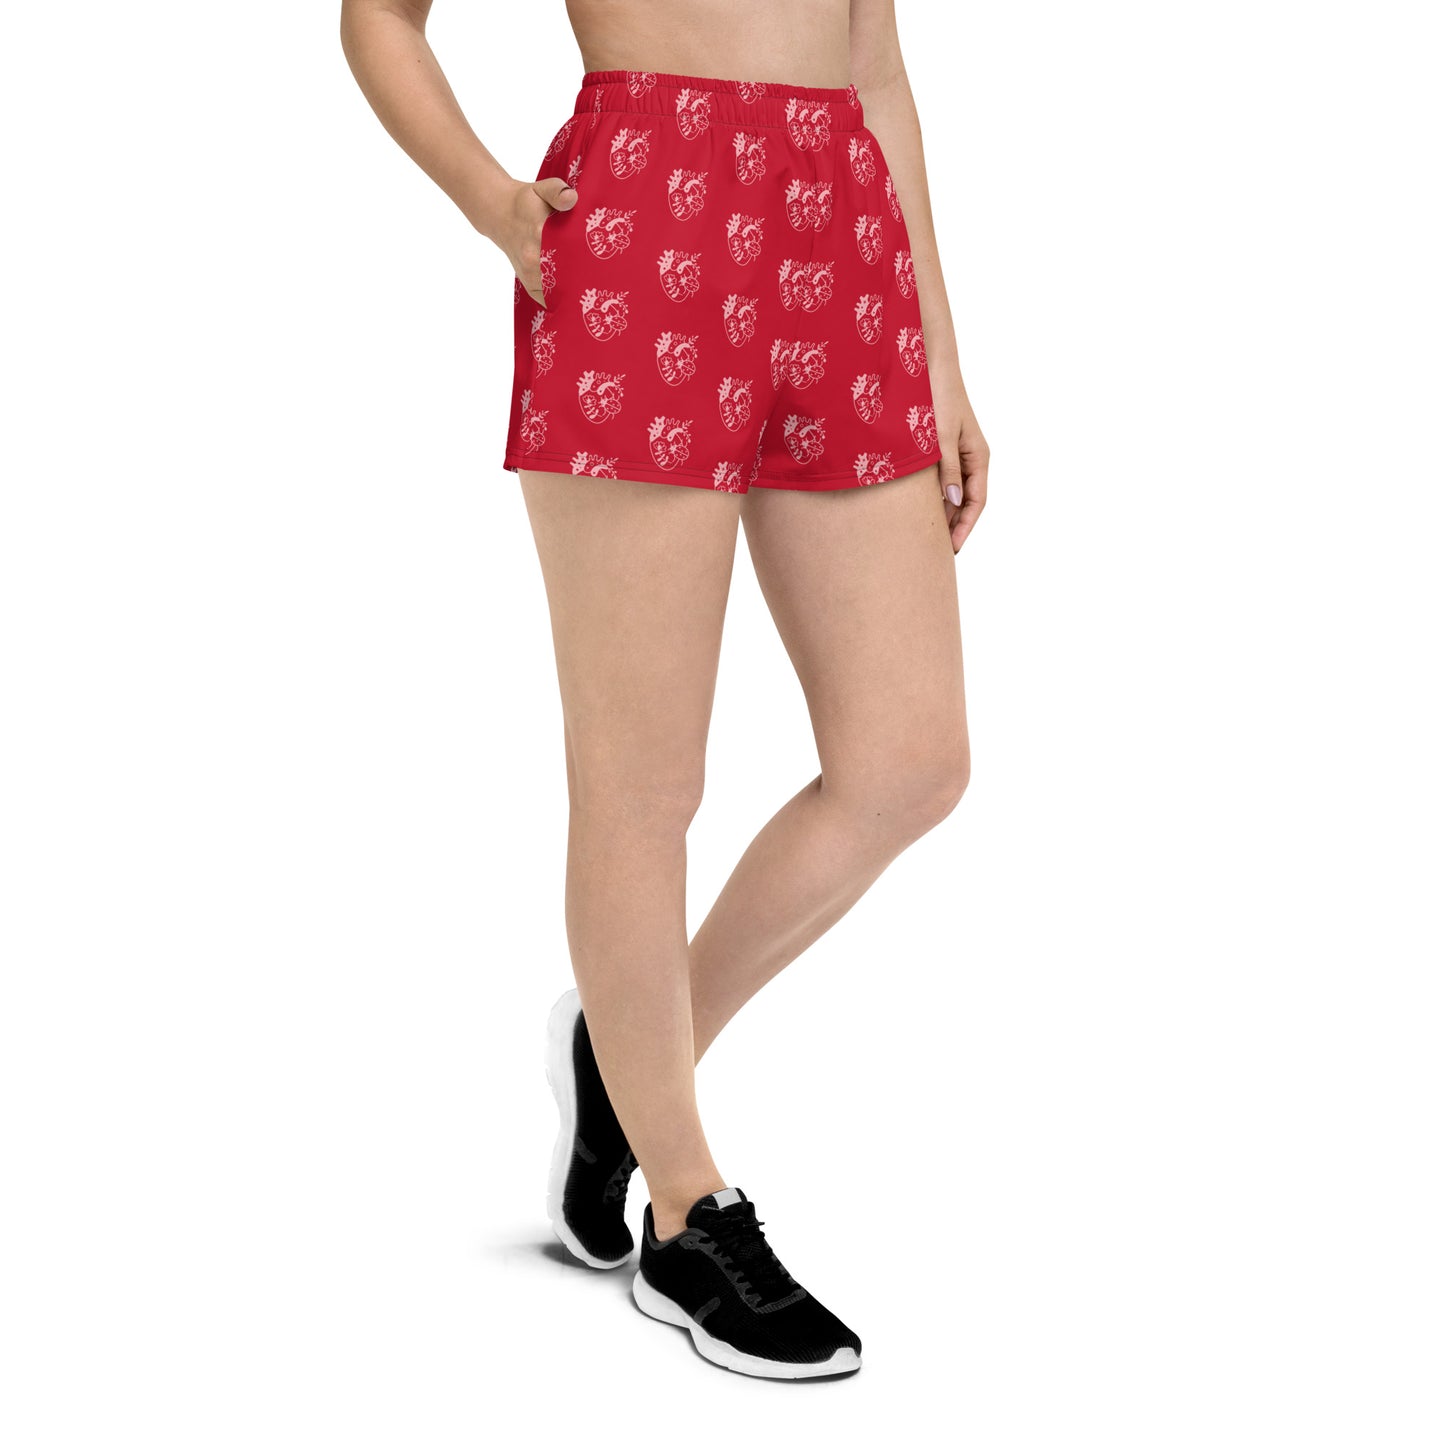 Vermilion Vibe Recycled Athletic Shorts